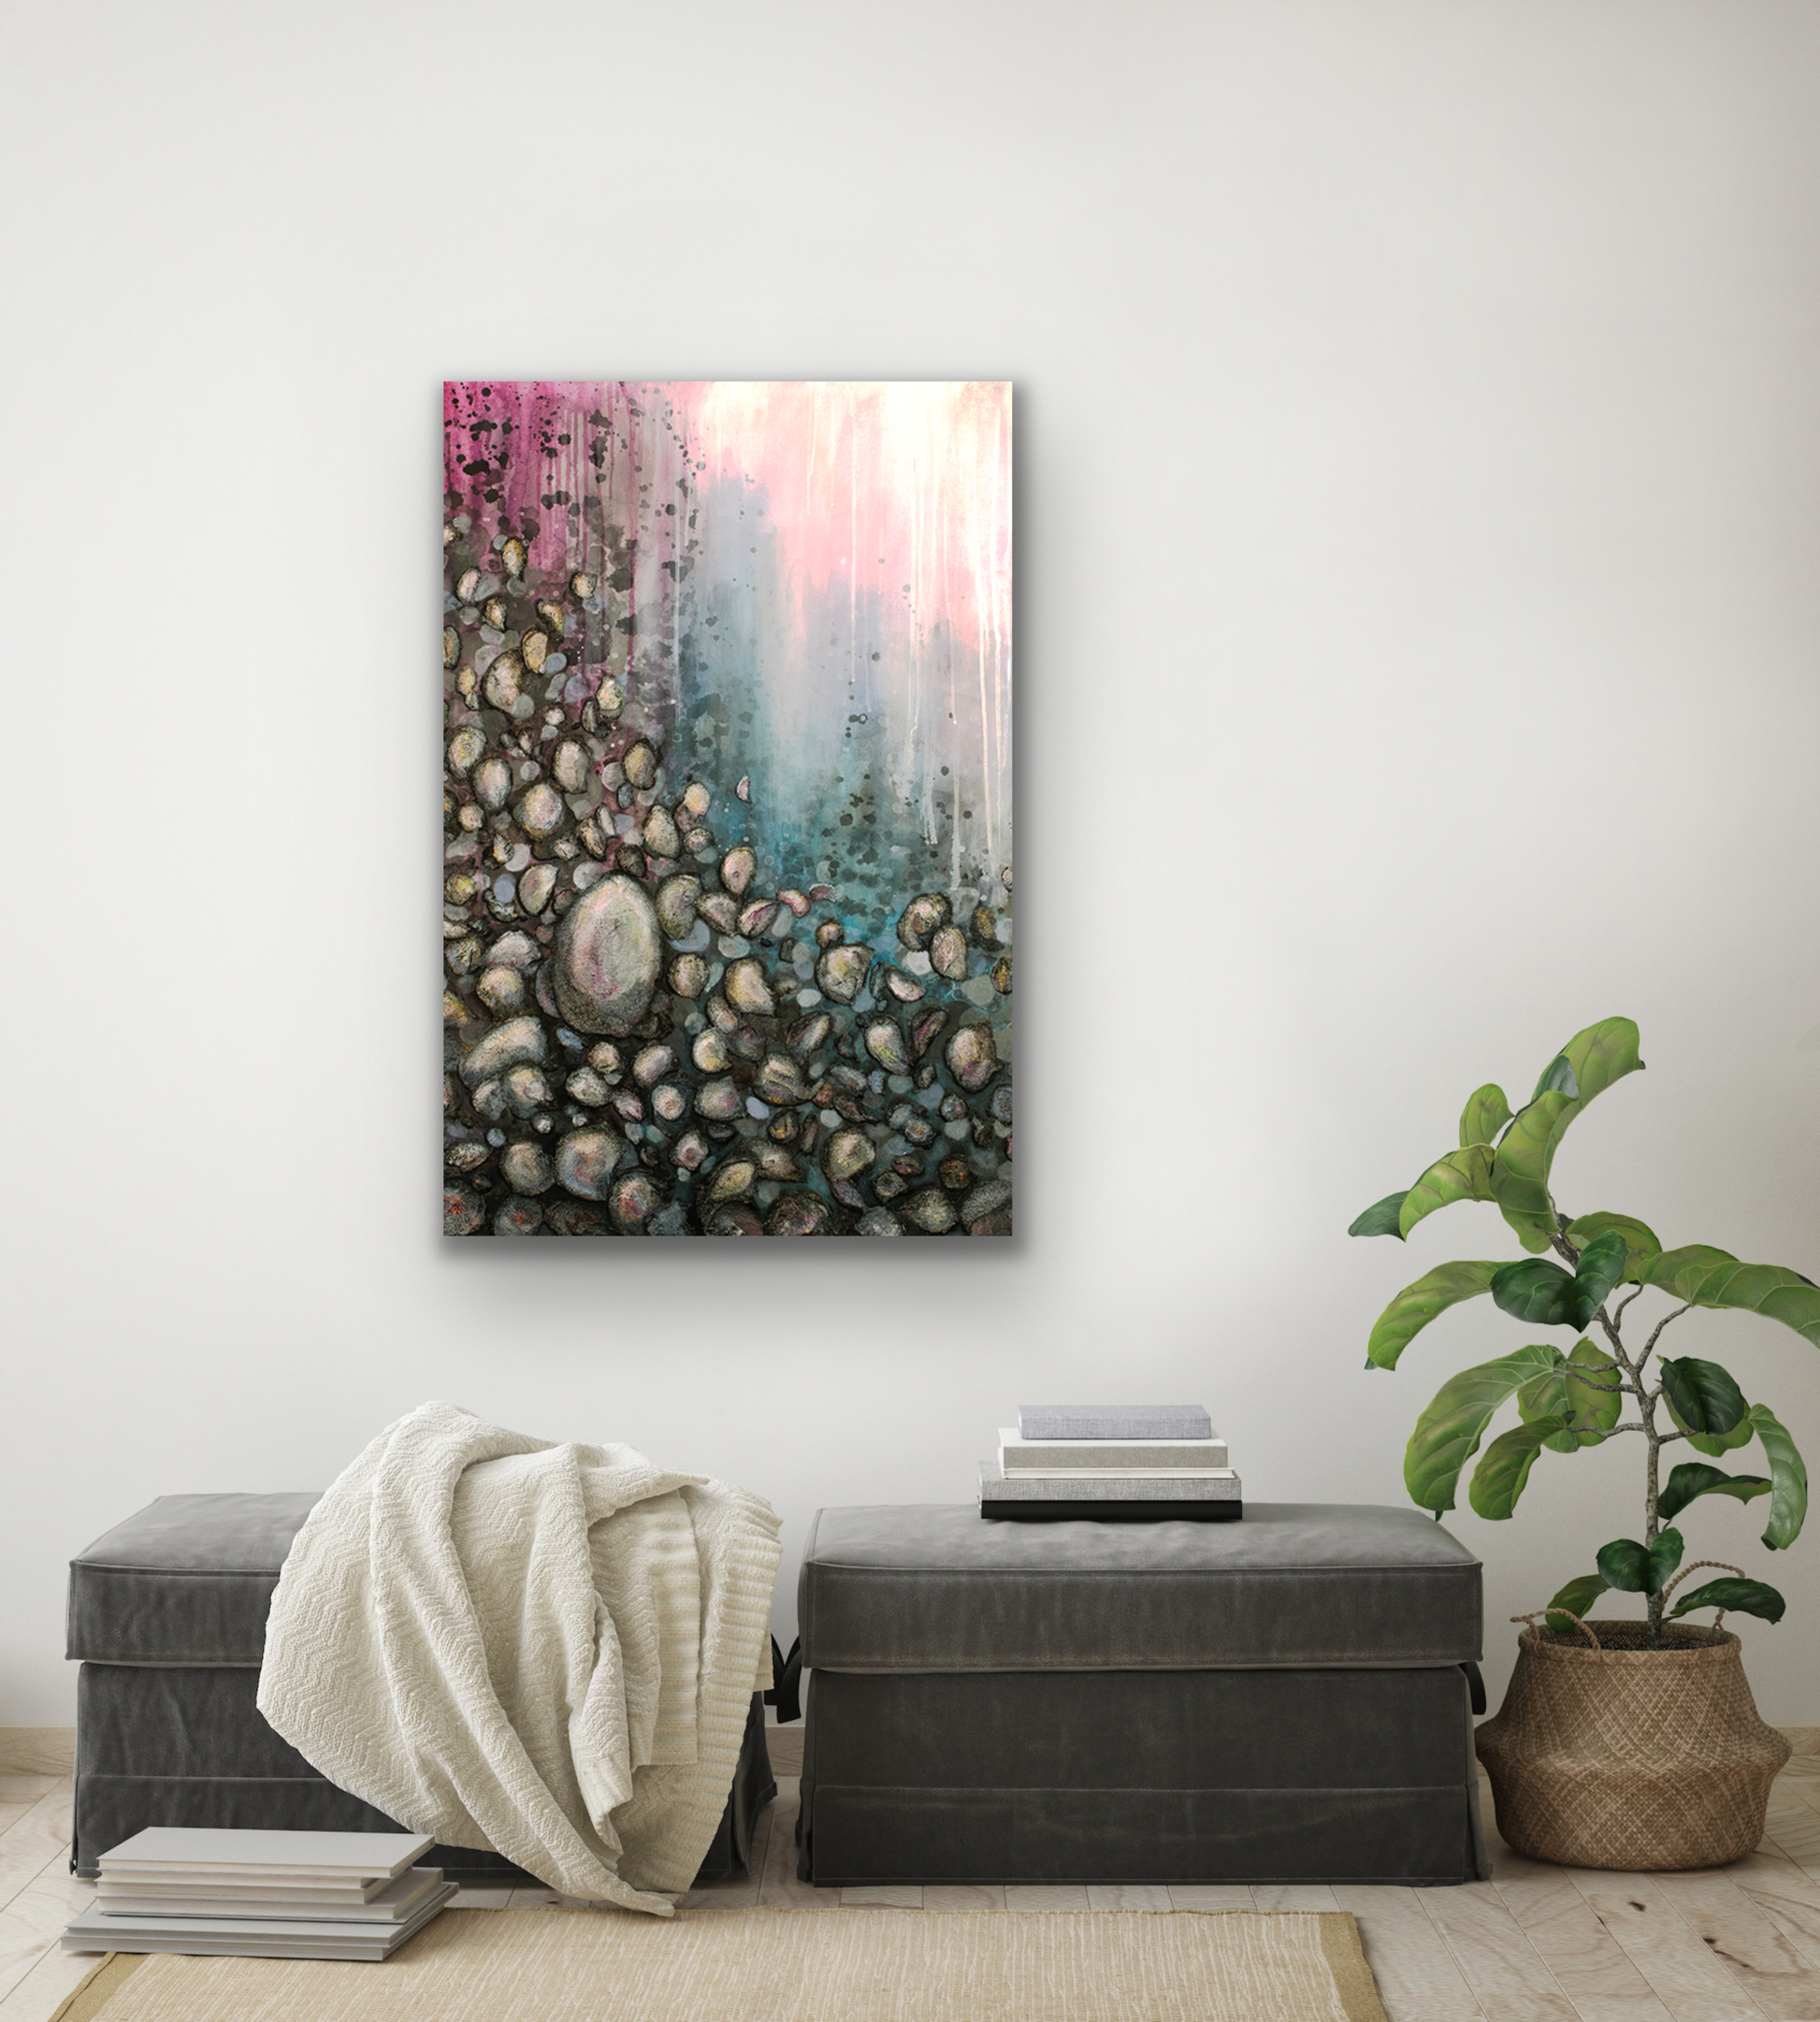 Skipping Stones is an abstract painting by Tiffany Reid.